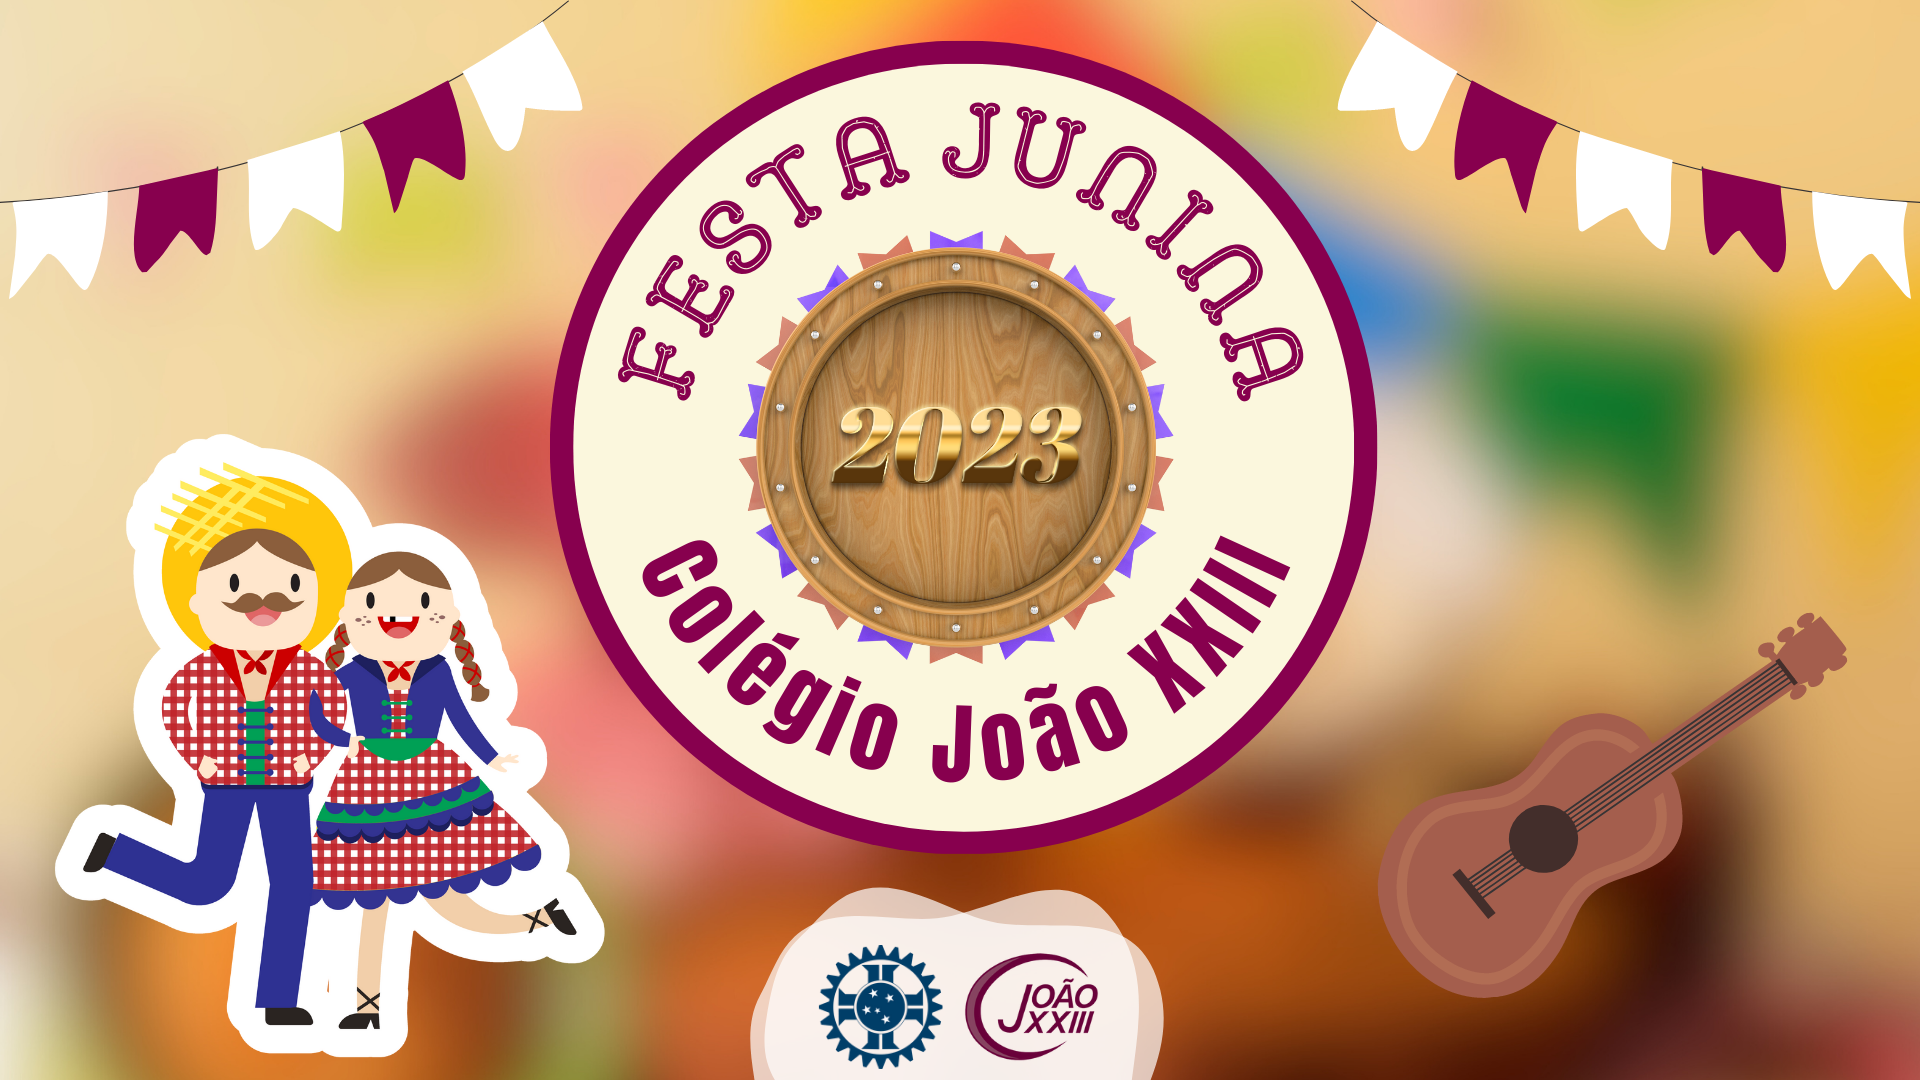 You are currently viewing Festa Junina 2023